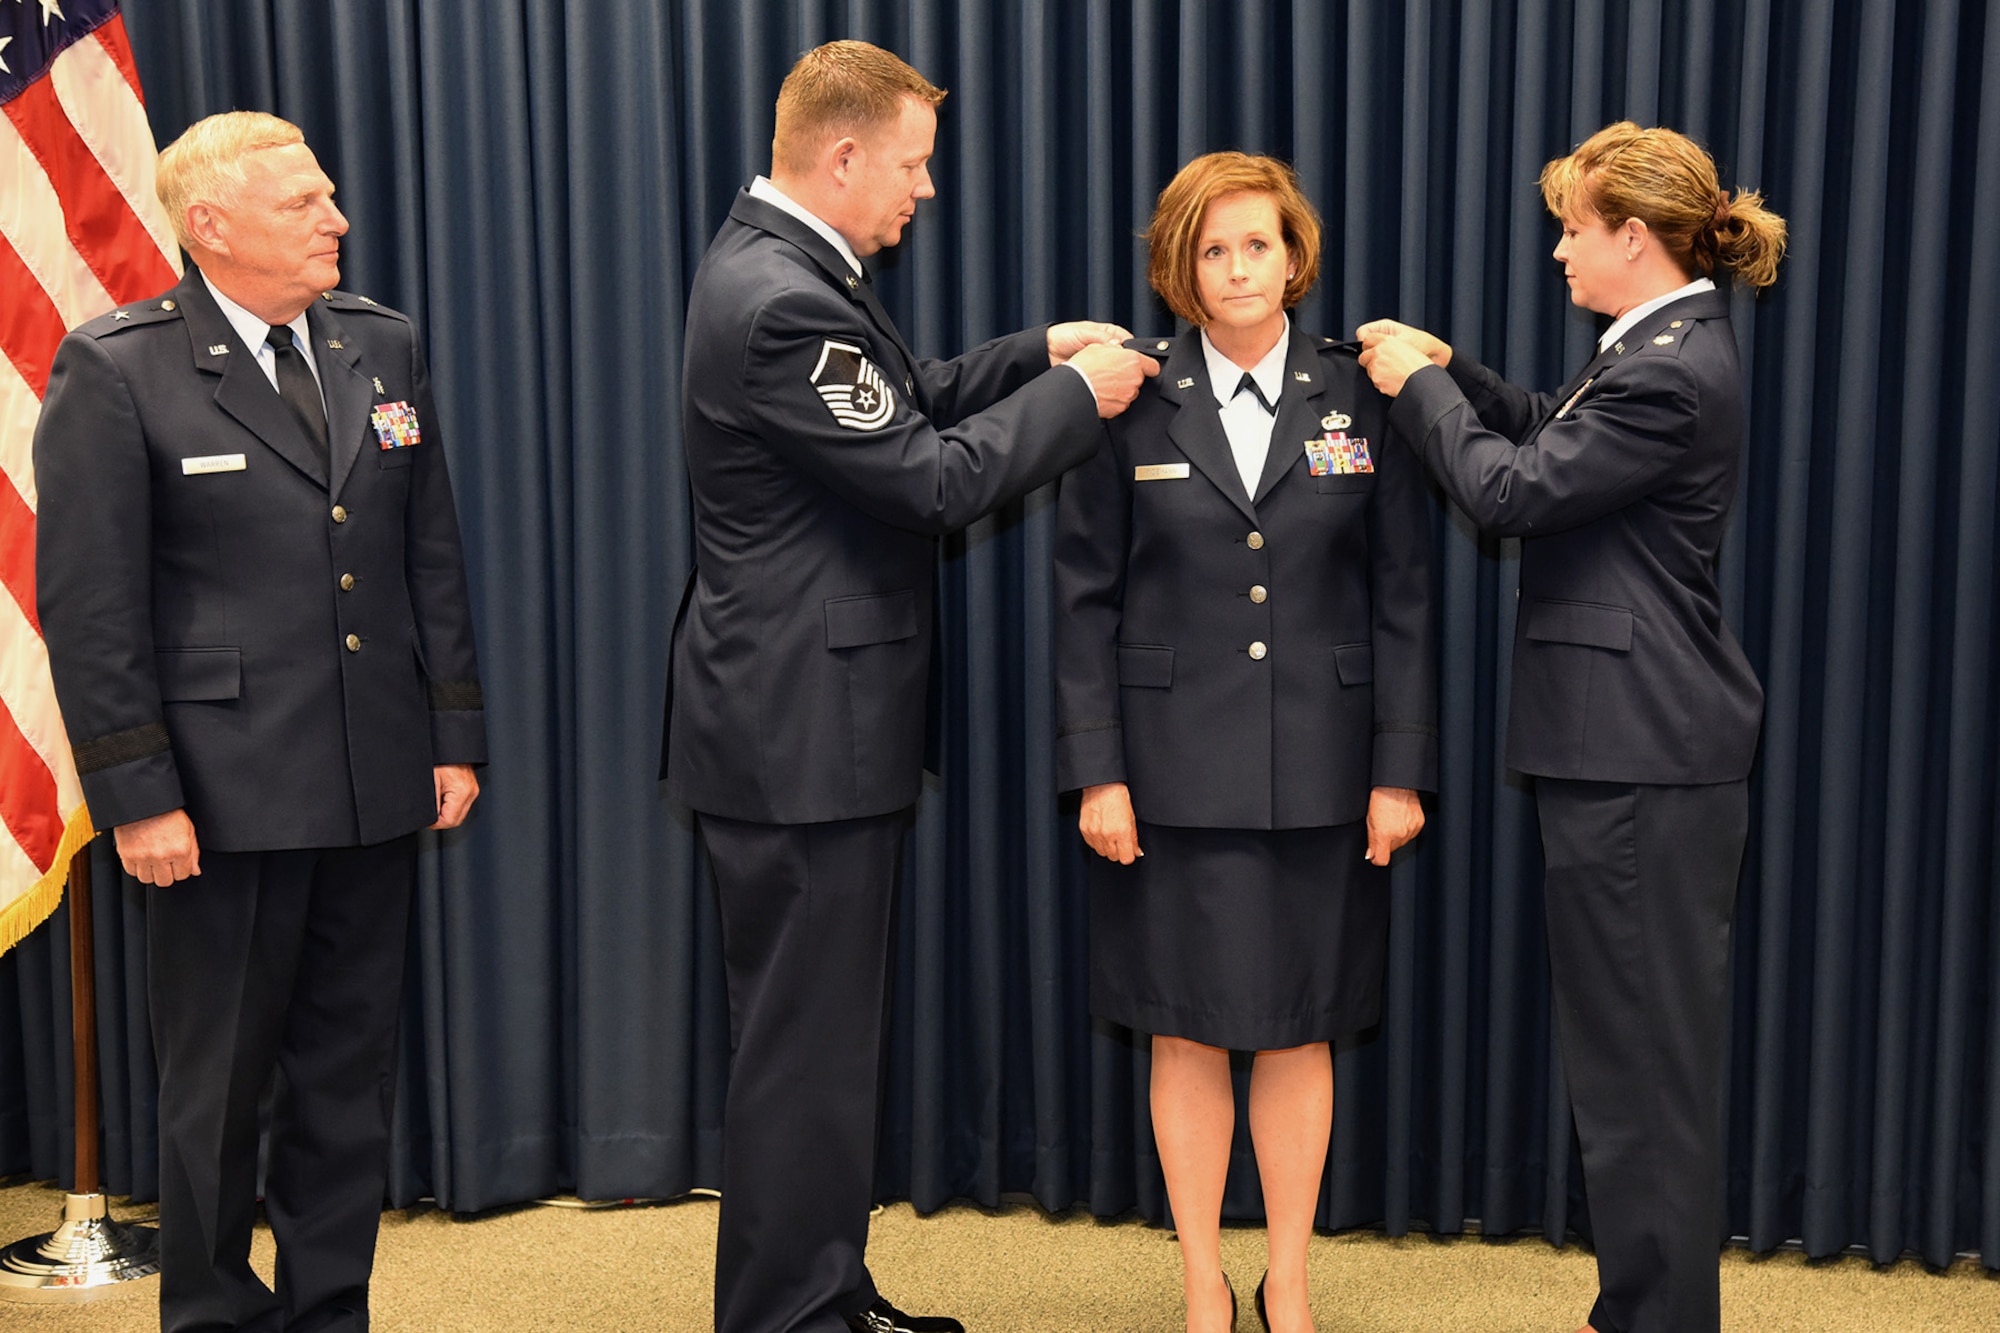 Col. Laurie Tidemann, HQ SDANG strategic plans officer, is pinned with her new rank by her siblings, Master Sgt. Eric Tidemann, 114th Fighter Wing recruiting office supervisor, and Major Lisa Tidemann, 114th Logistics Readiness Squadron officer, in a ceremony held at Joe Foss Field, S.D. June 4, 2016.  The Tidemann family has a long line of service in the South Dakota Air National Guard starting with the father, retired Col. Merlyn Tidemann, former 114th Maintenance Group commander. (U.S. Air National Guard photo by Staff Sgt. Luke Olson/Released)